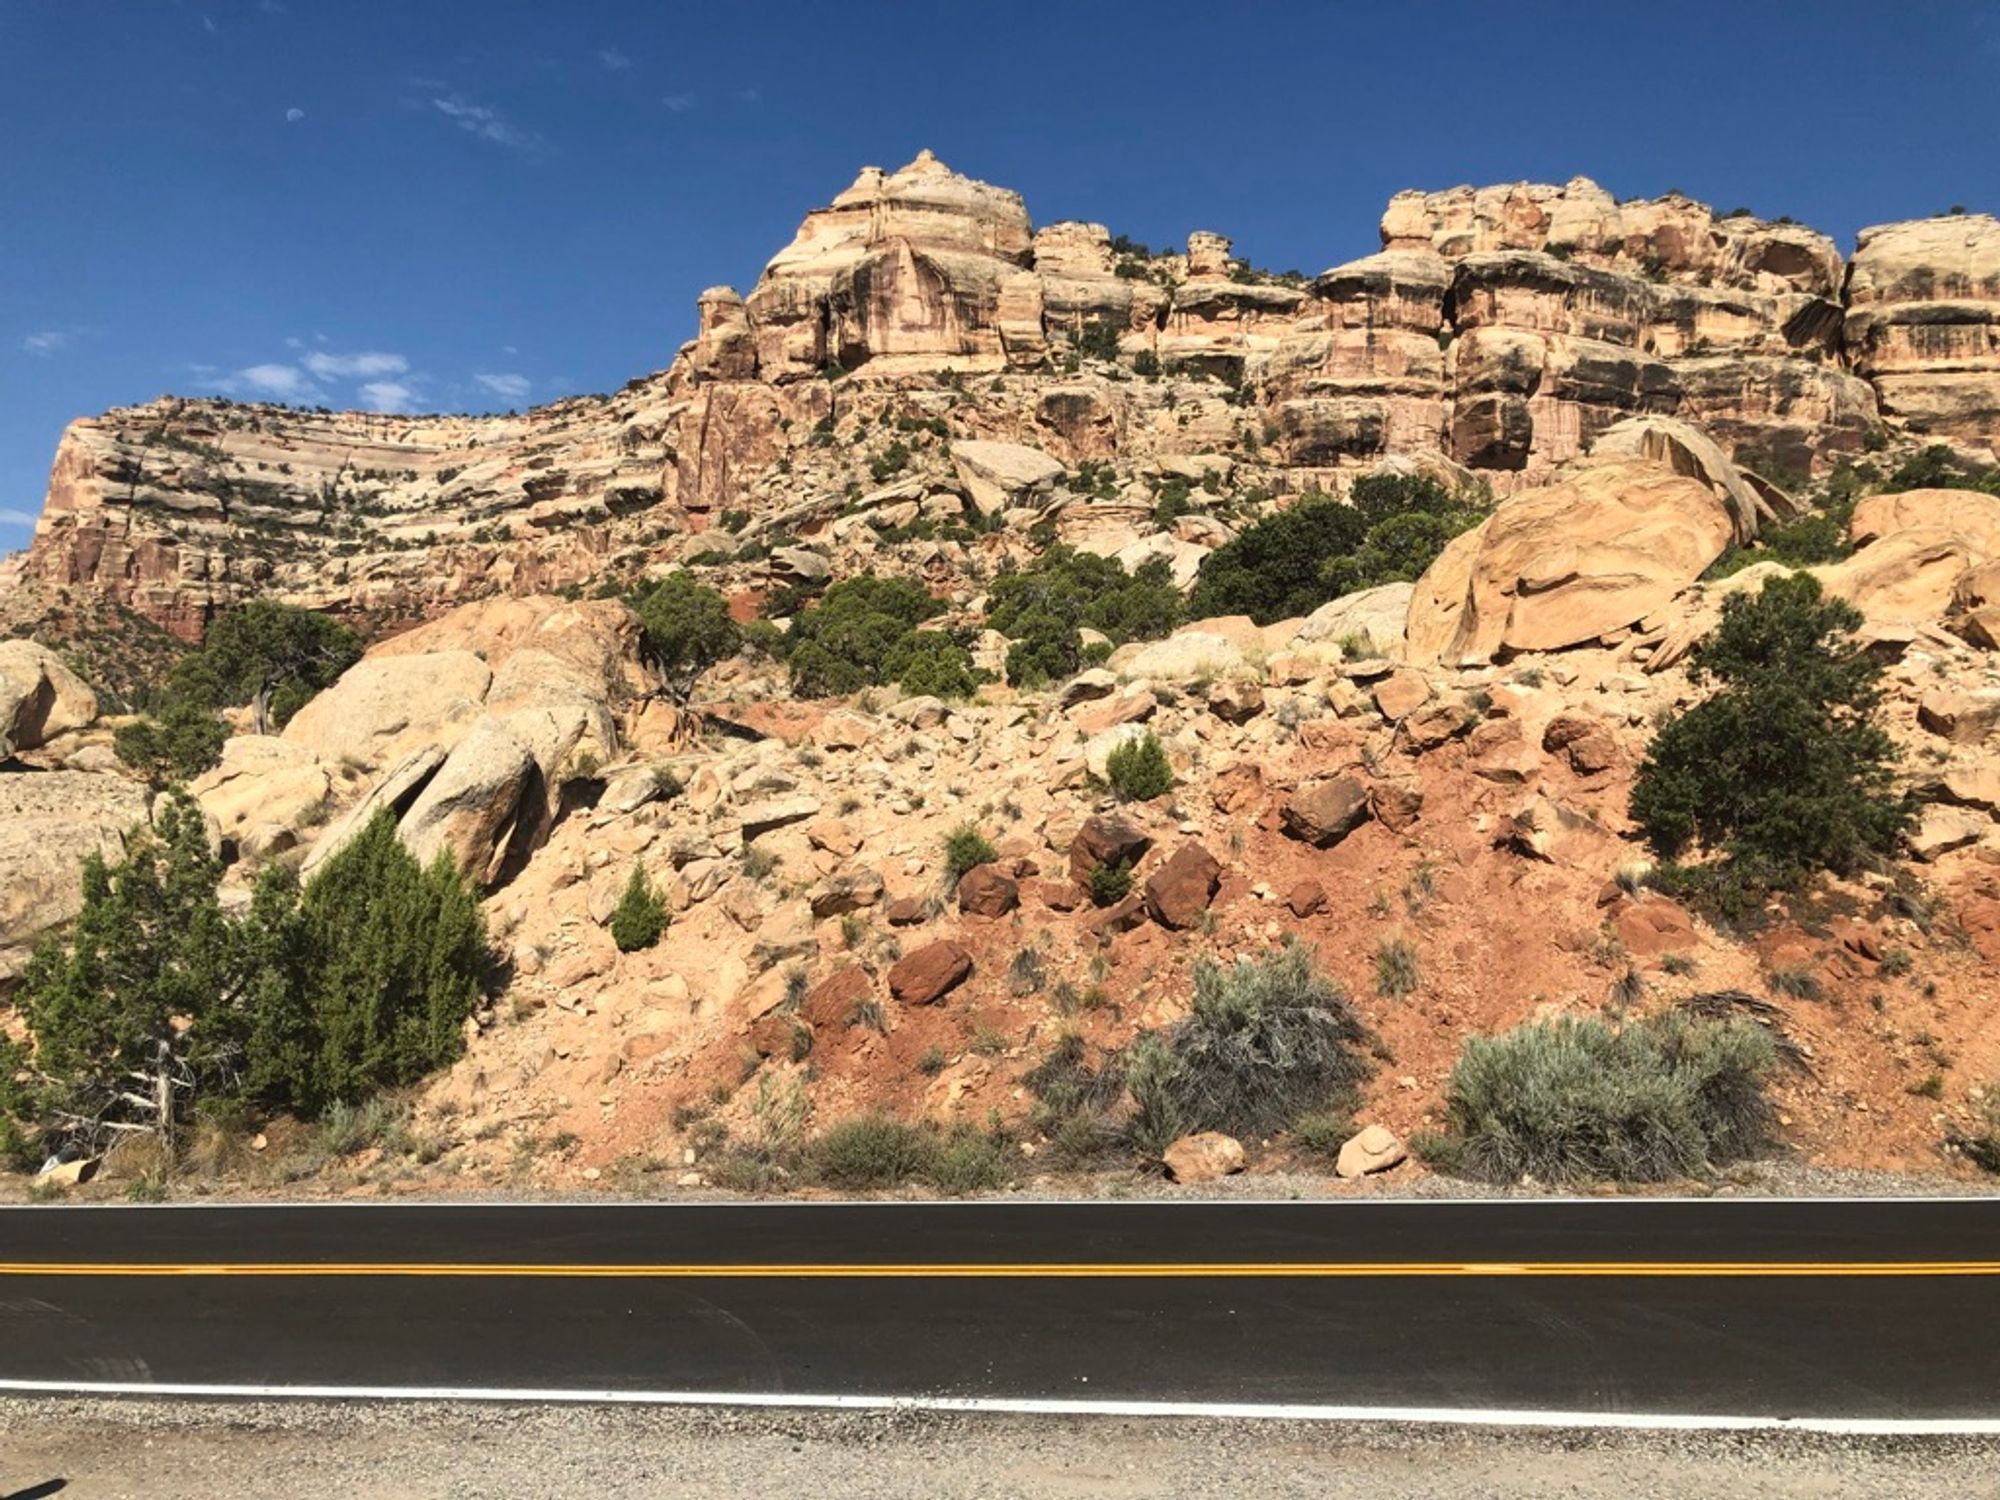 Fresh asphalt in the foreground and tan rock formations taking up most of the background